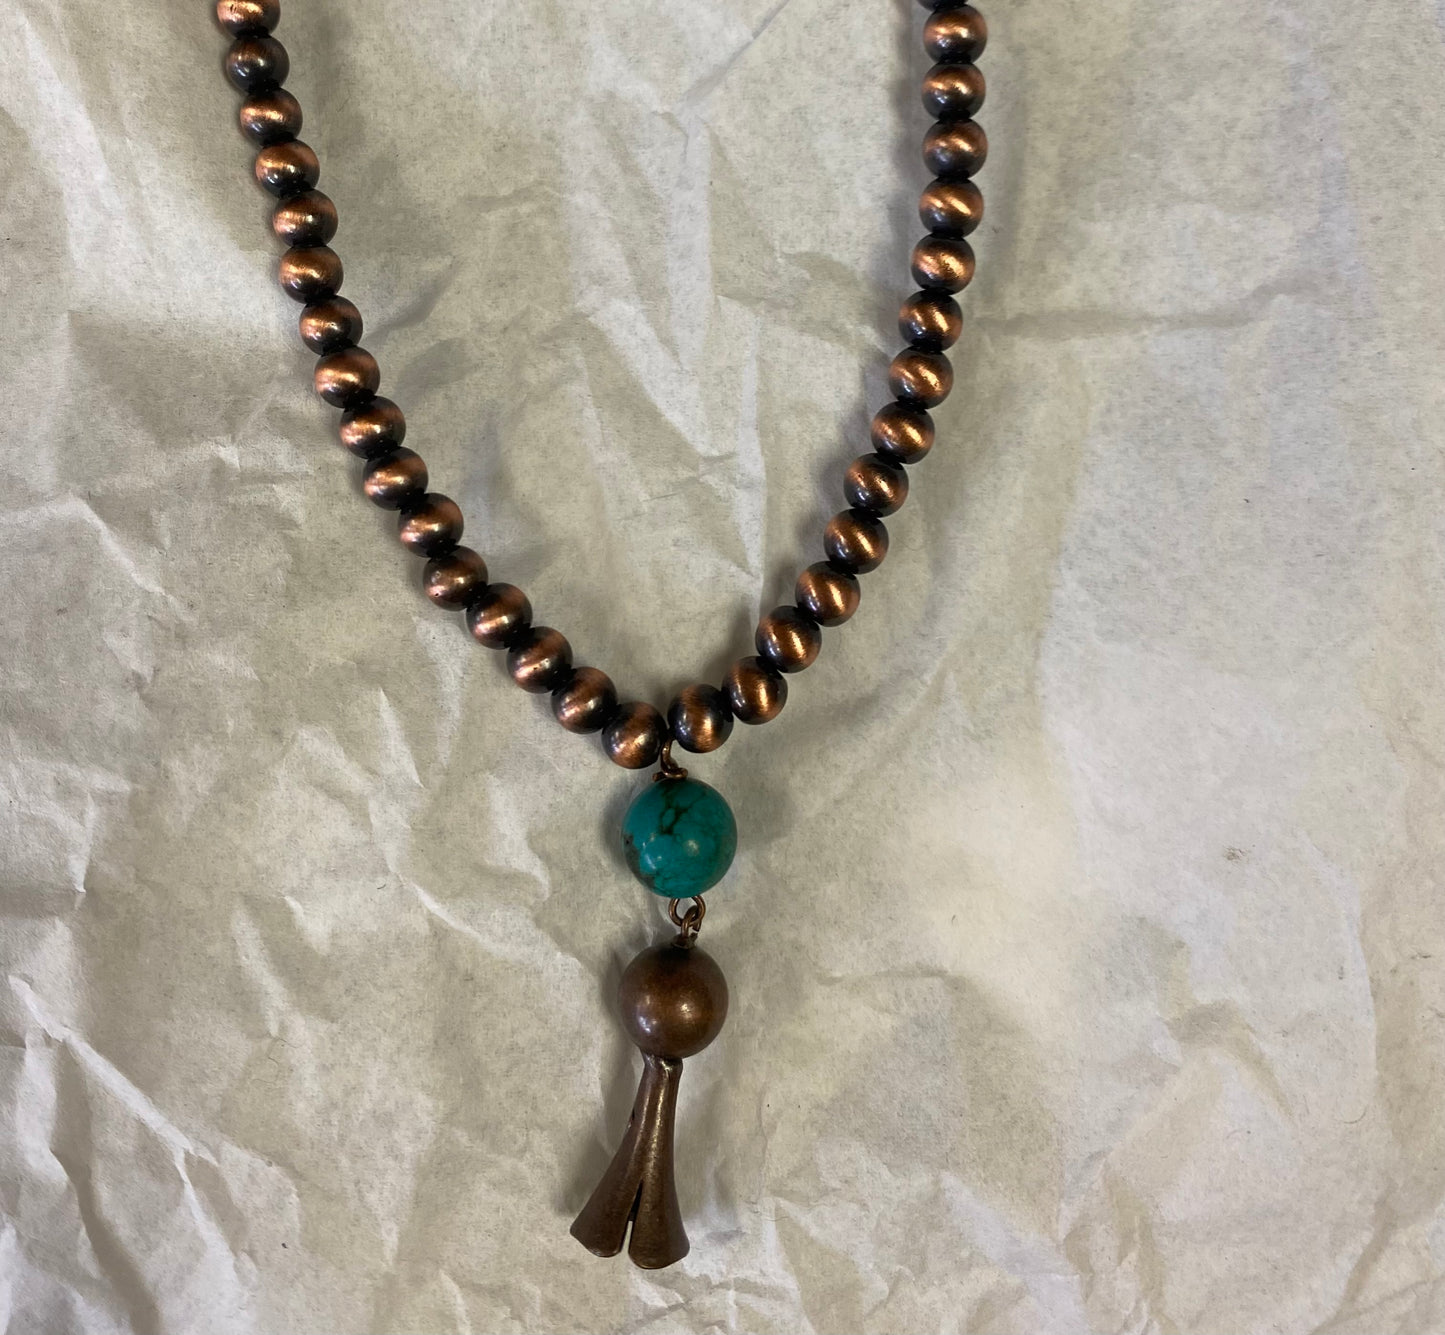 Choker necklace, turquoise and brown stone with concho accent.